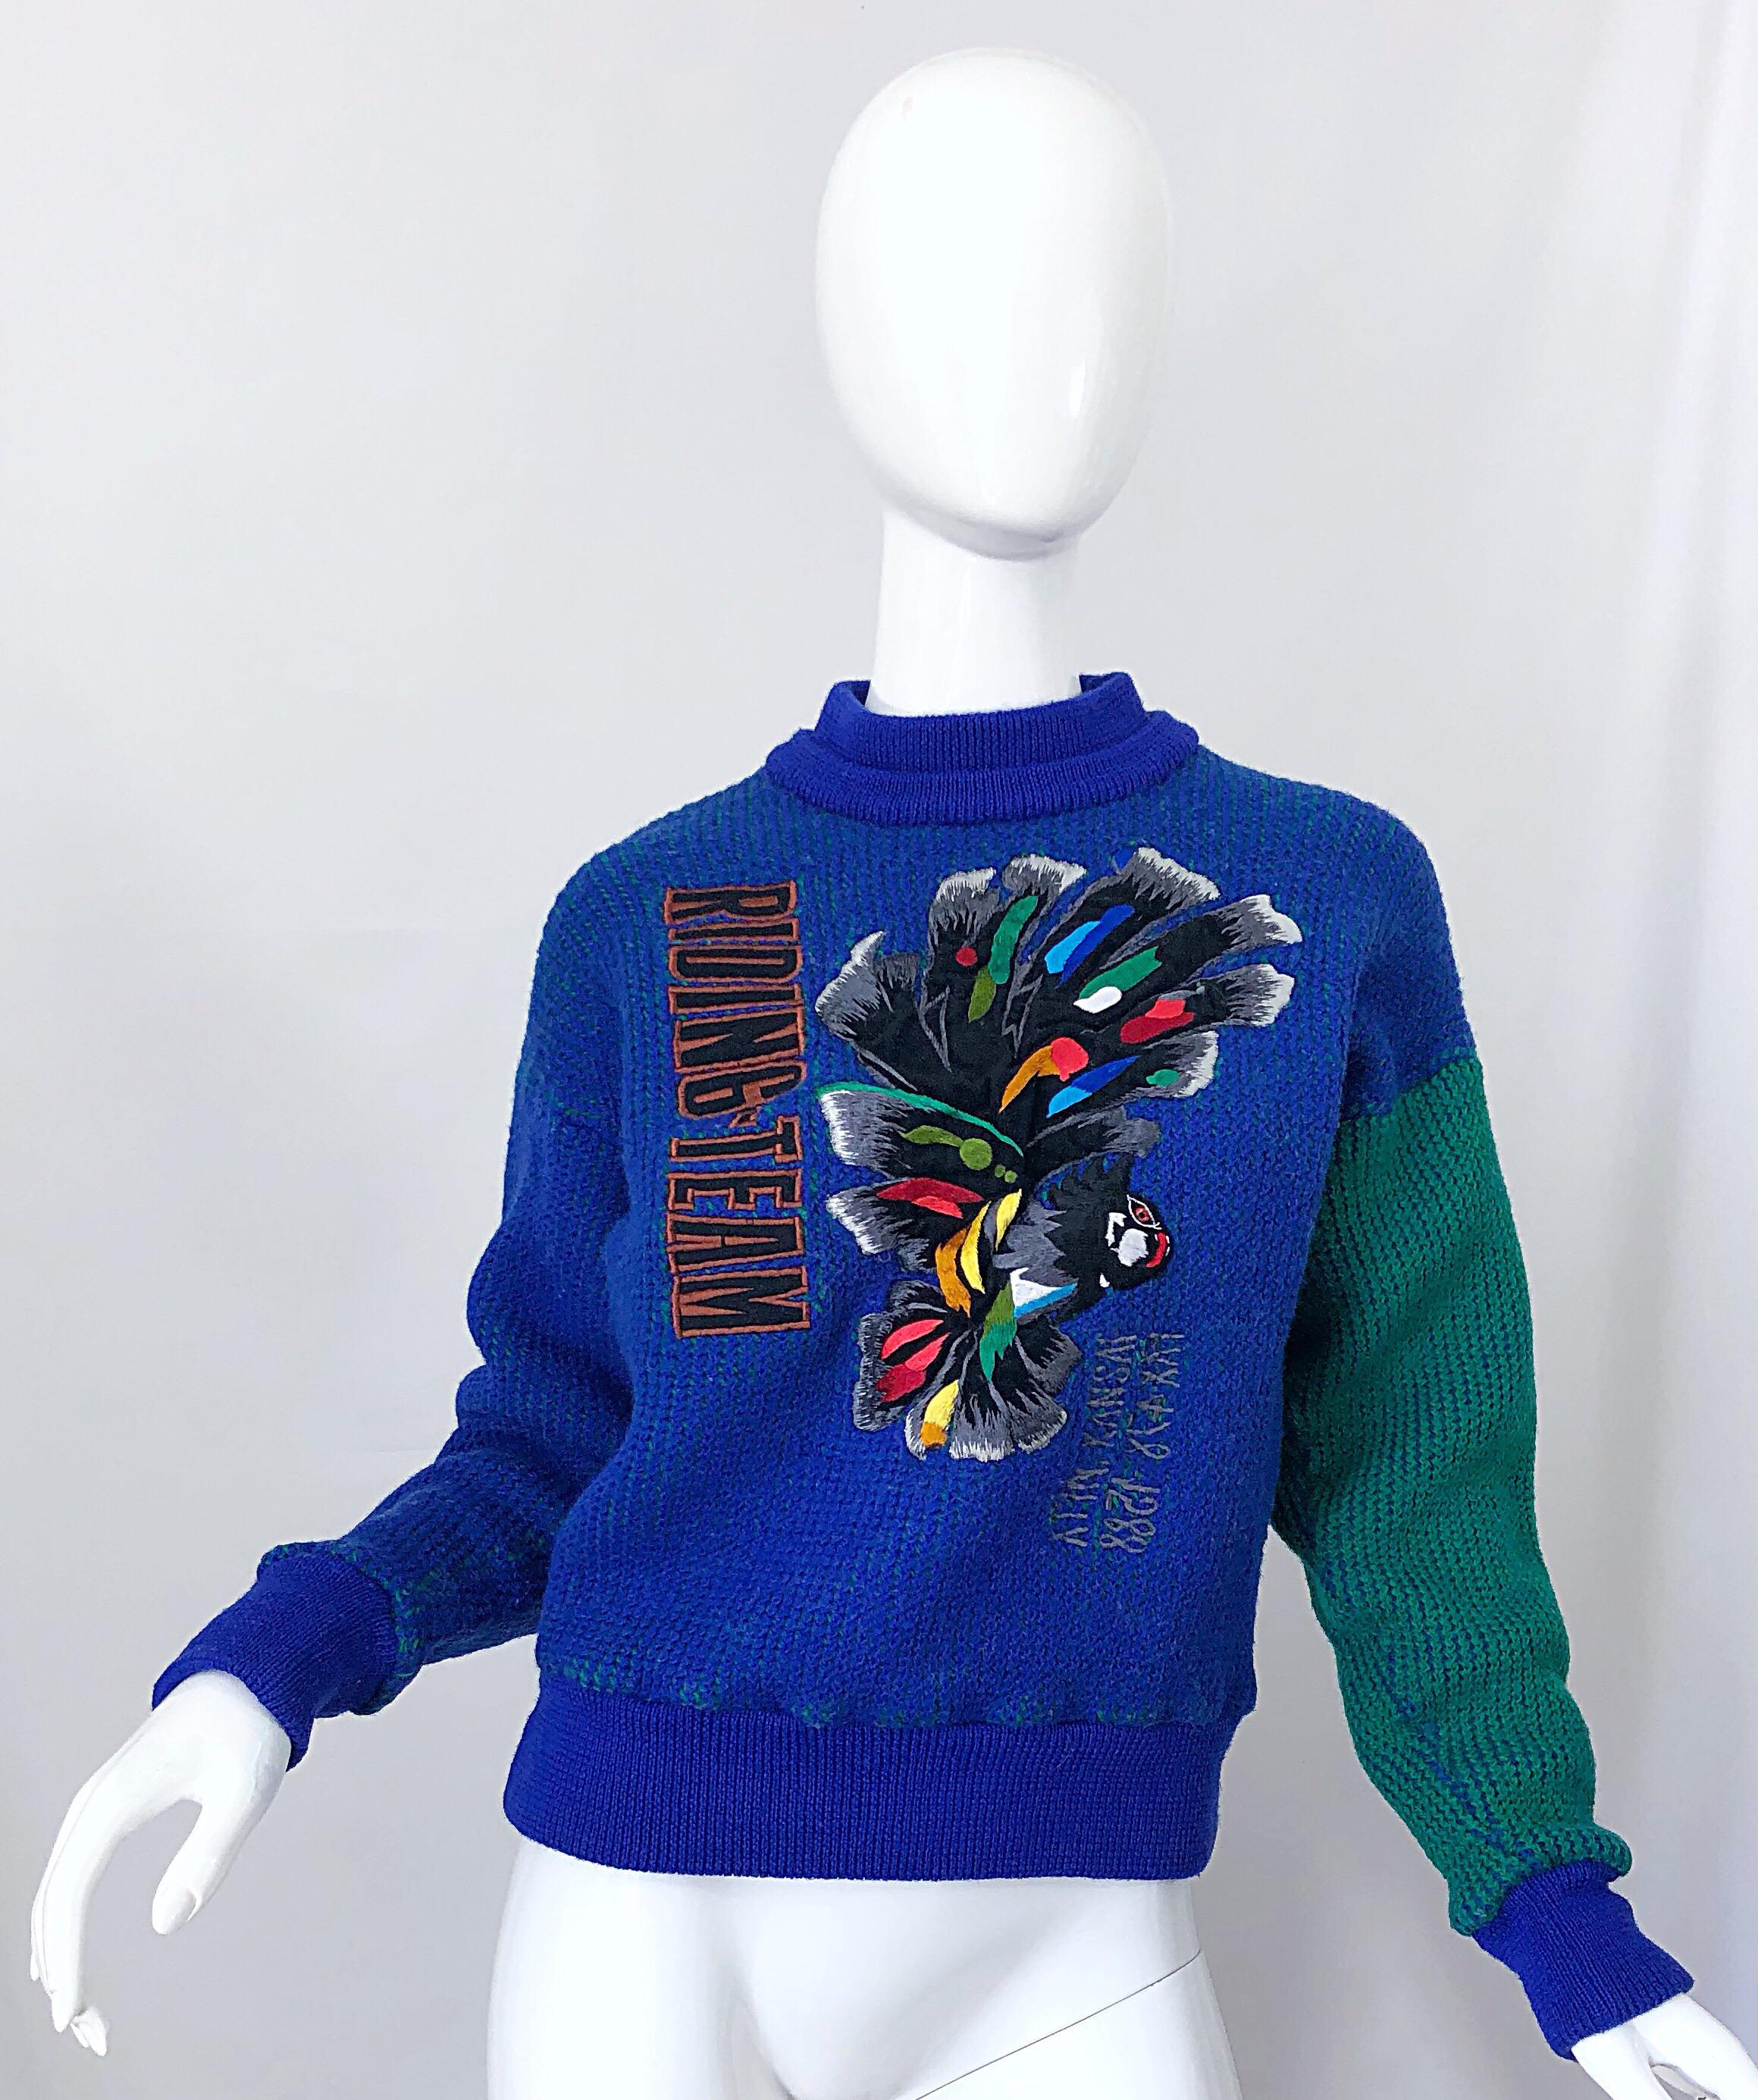 Rare 1980s vintage KANSAI YAMAMOTO royal blue and green color block novelty ' Riding Team ' embroidered wool sweater! Features a royal blue and green intarsia soft woven wool. Embroidery detail on the front. Simply slips over the head. The perfect